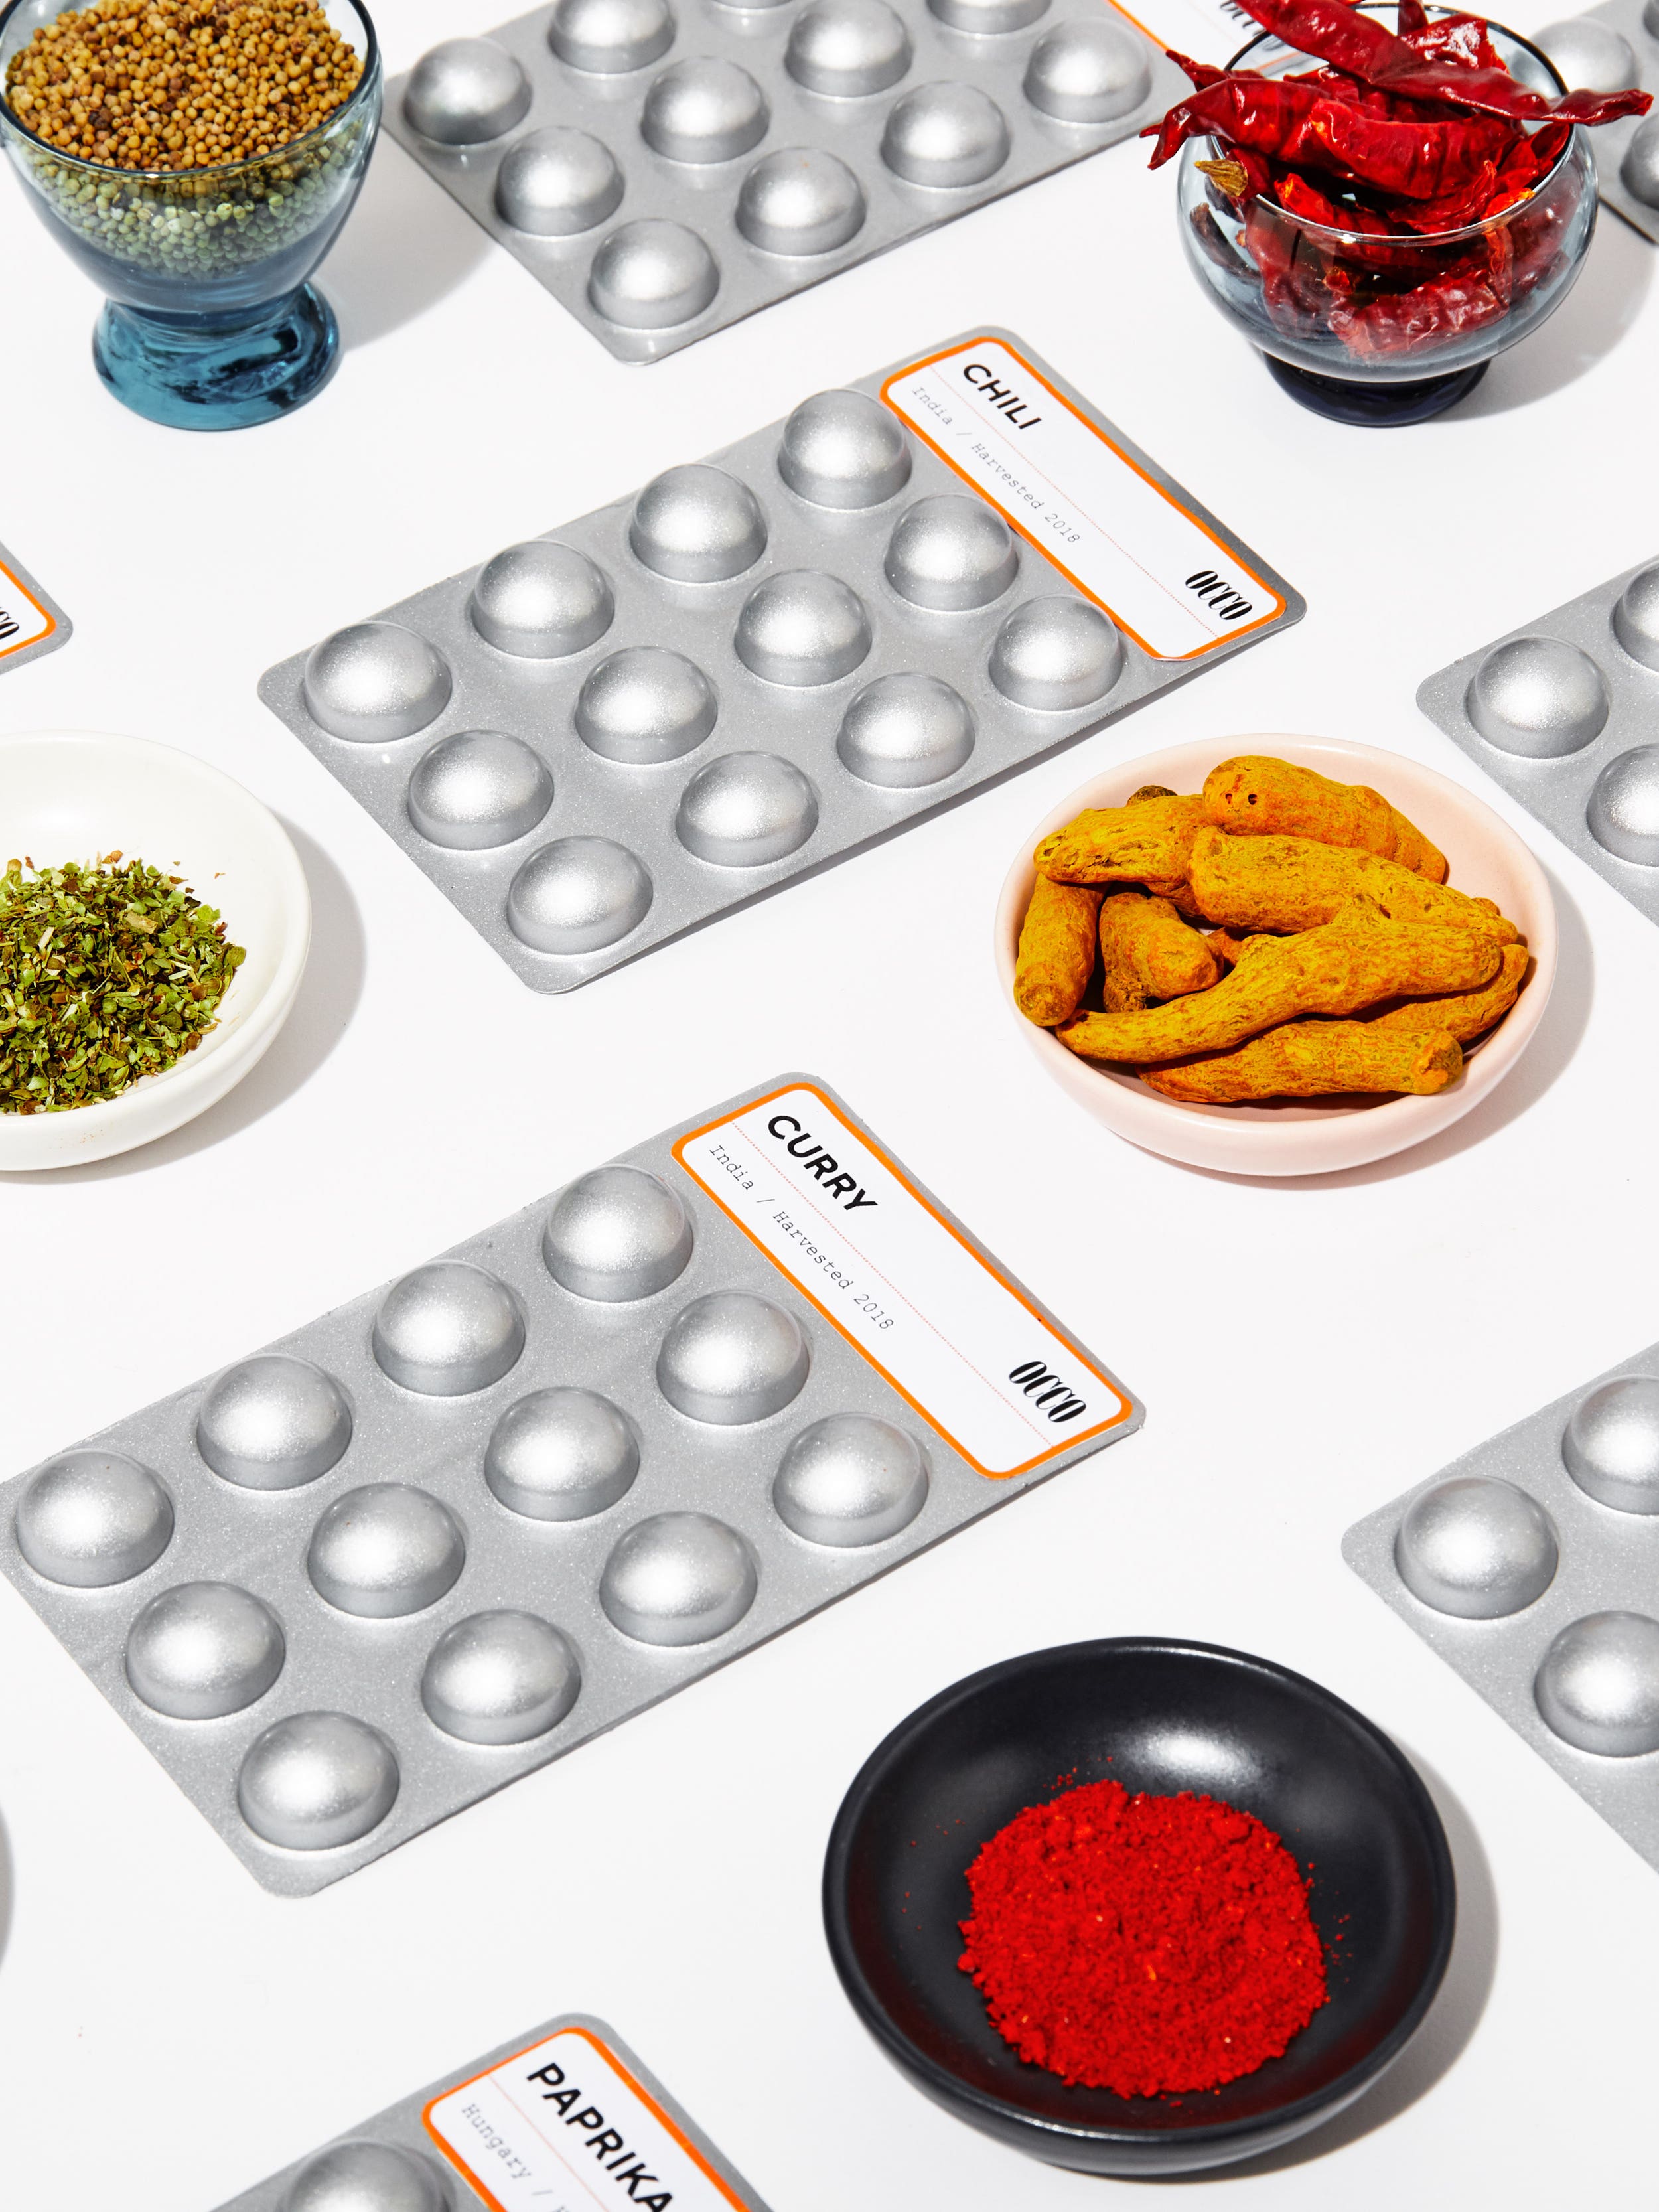 This Genius Product Is the Single Best Way to Organize Your Pantry